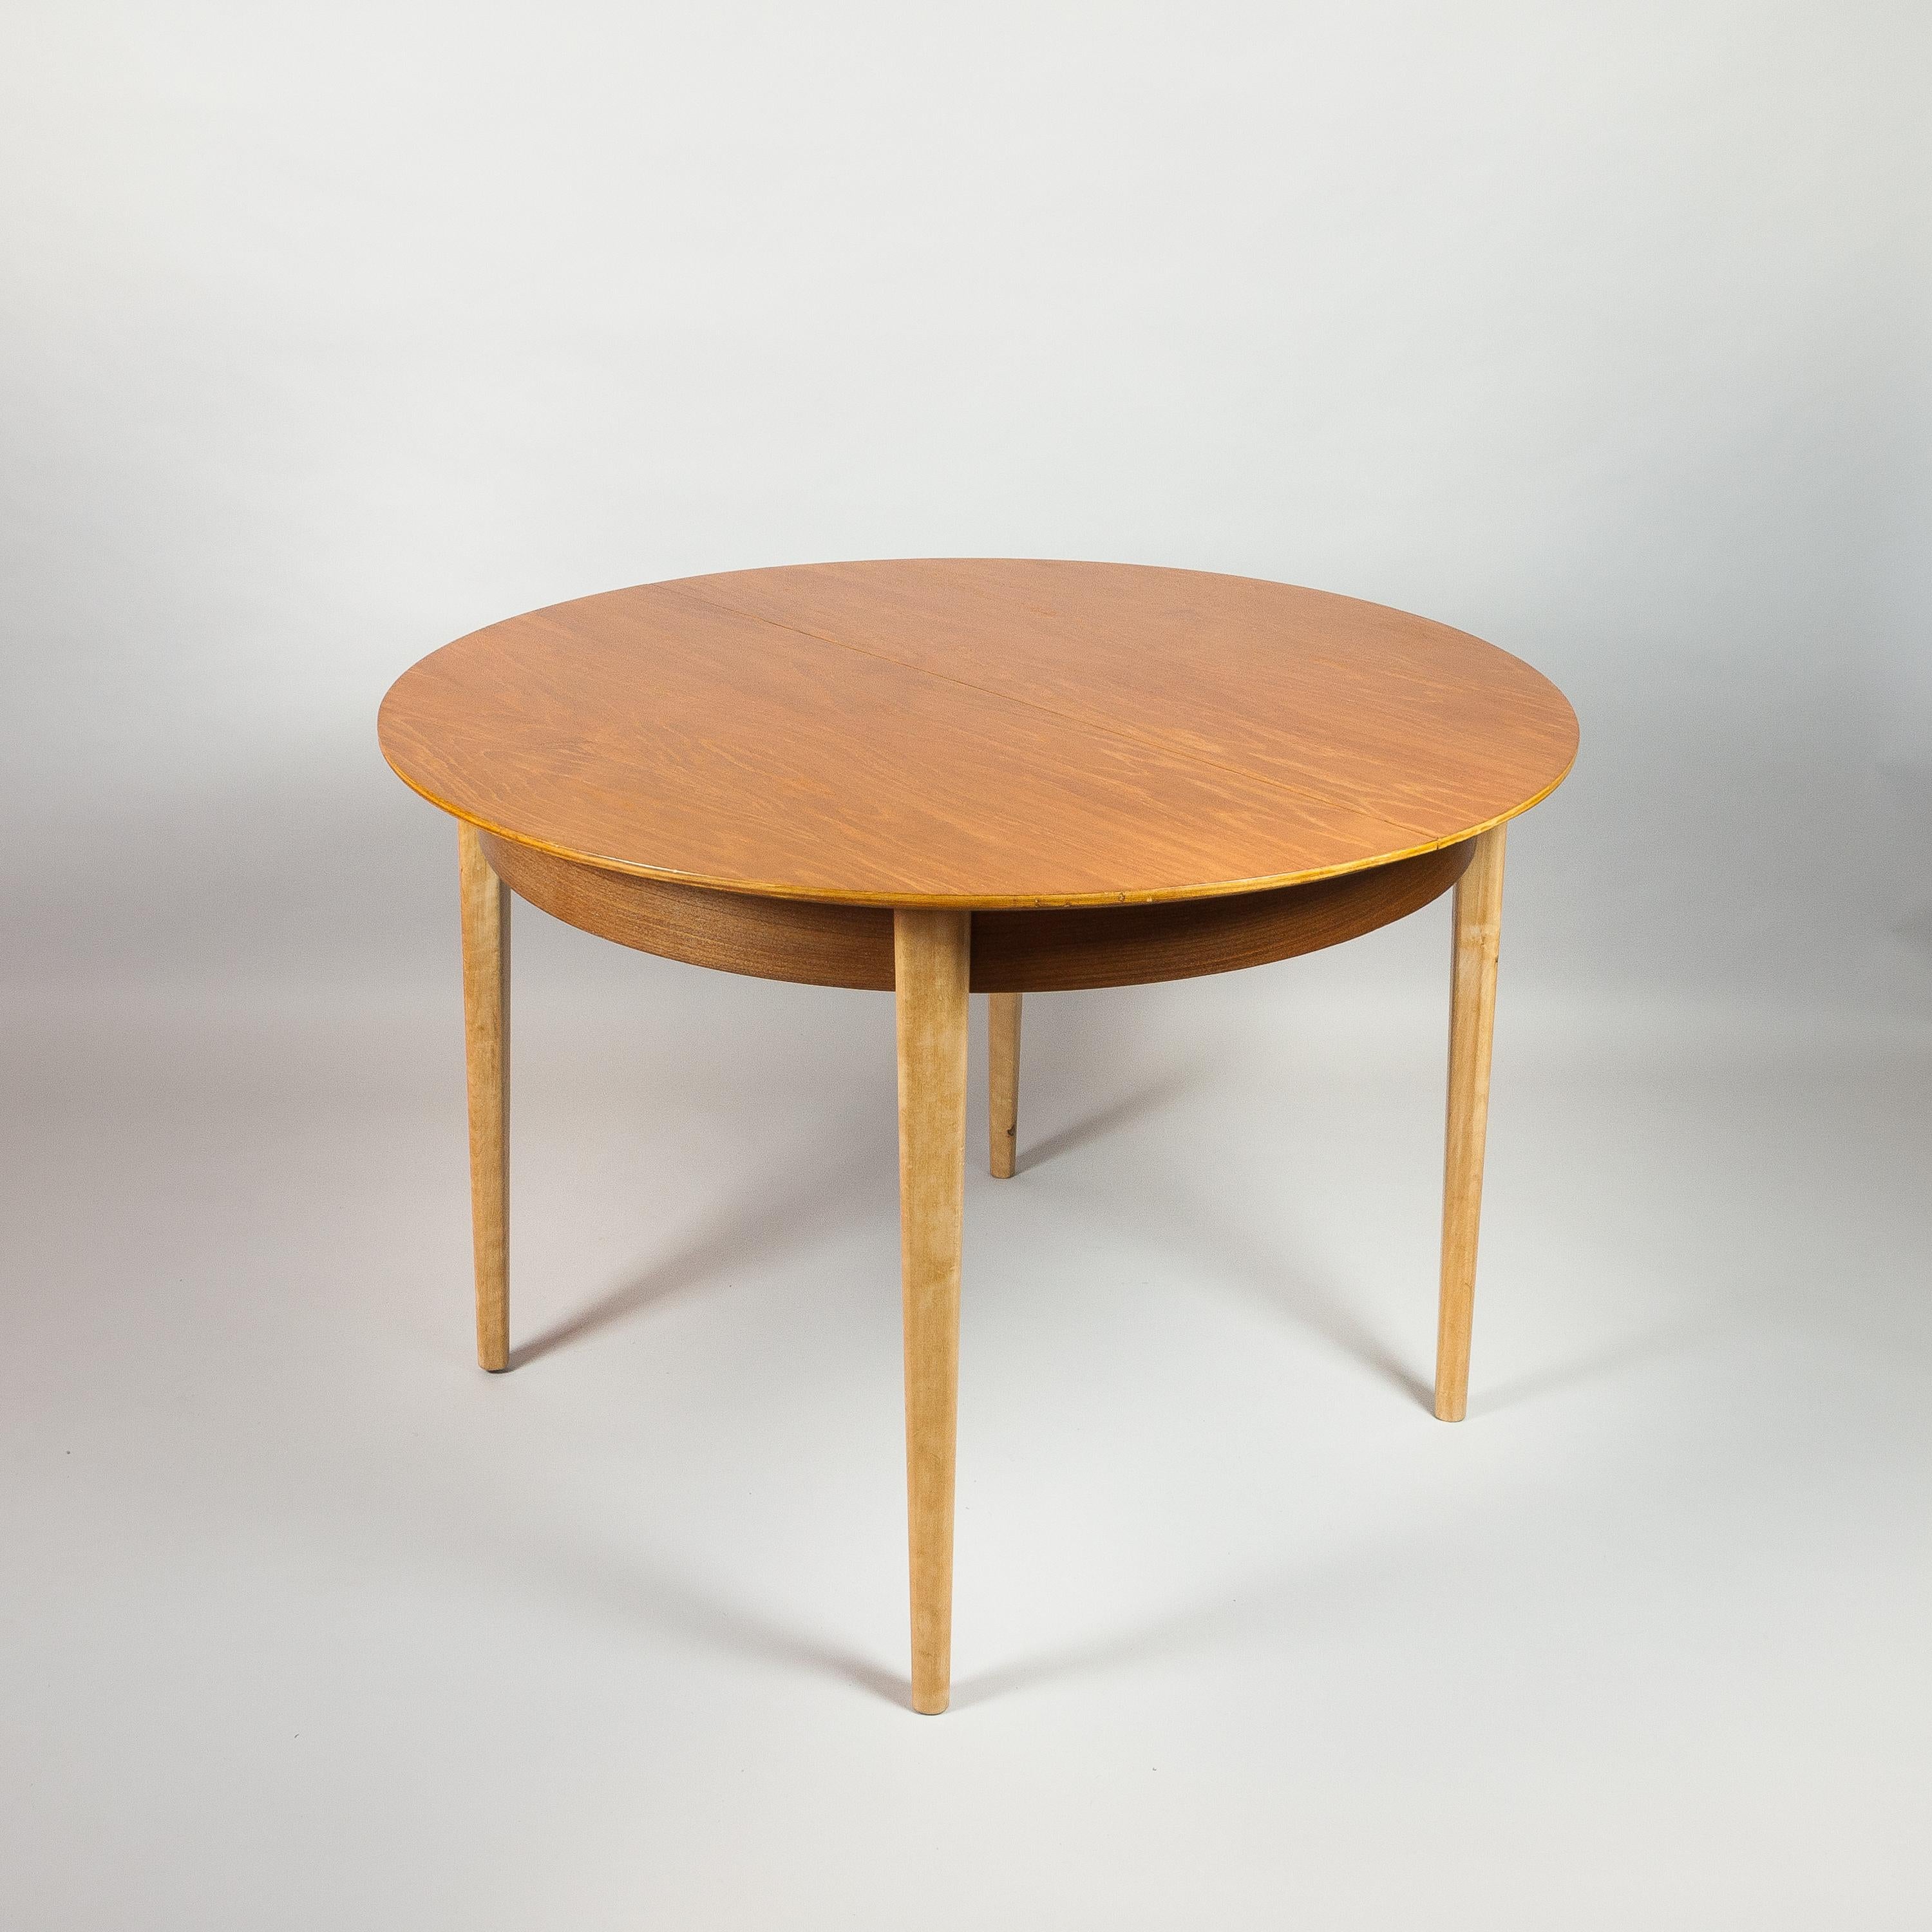 TB05 extendable dining table by Cees Braakman for Pastoe, teak and maple. In great condition the table has been fully refinished. The table dismantles for easy transportation. Please note the width is 105cms when closed and 155cms when extended,